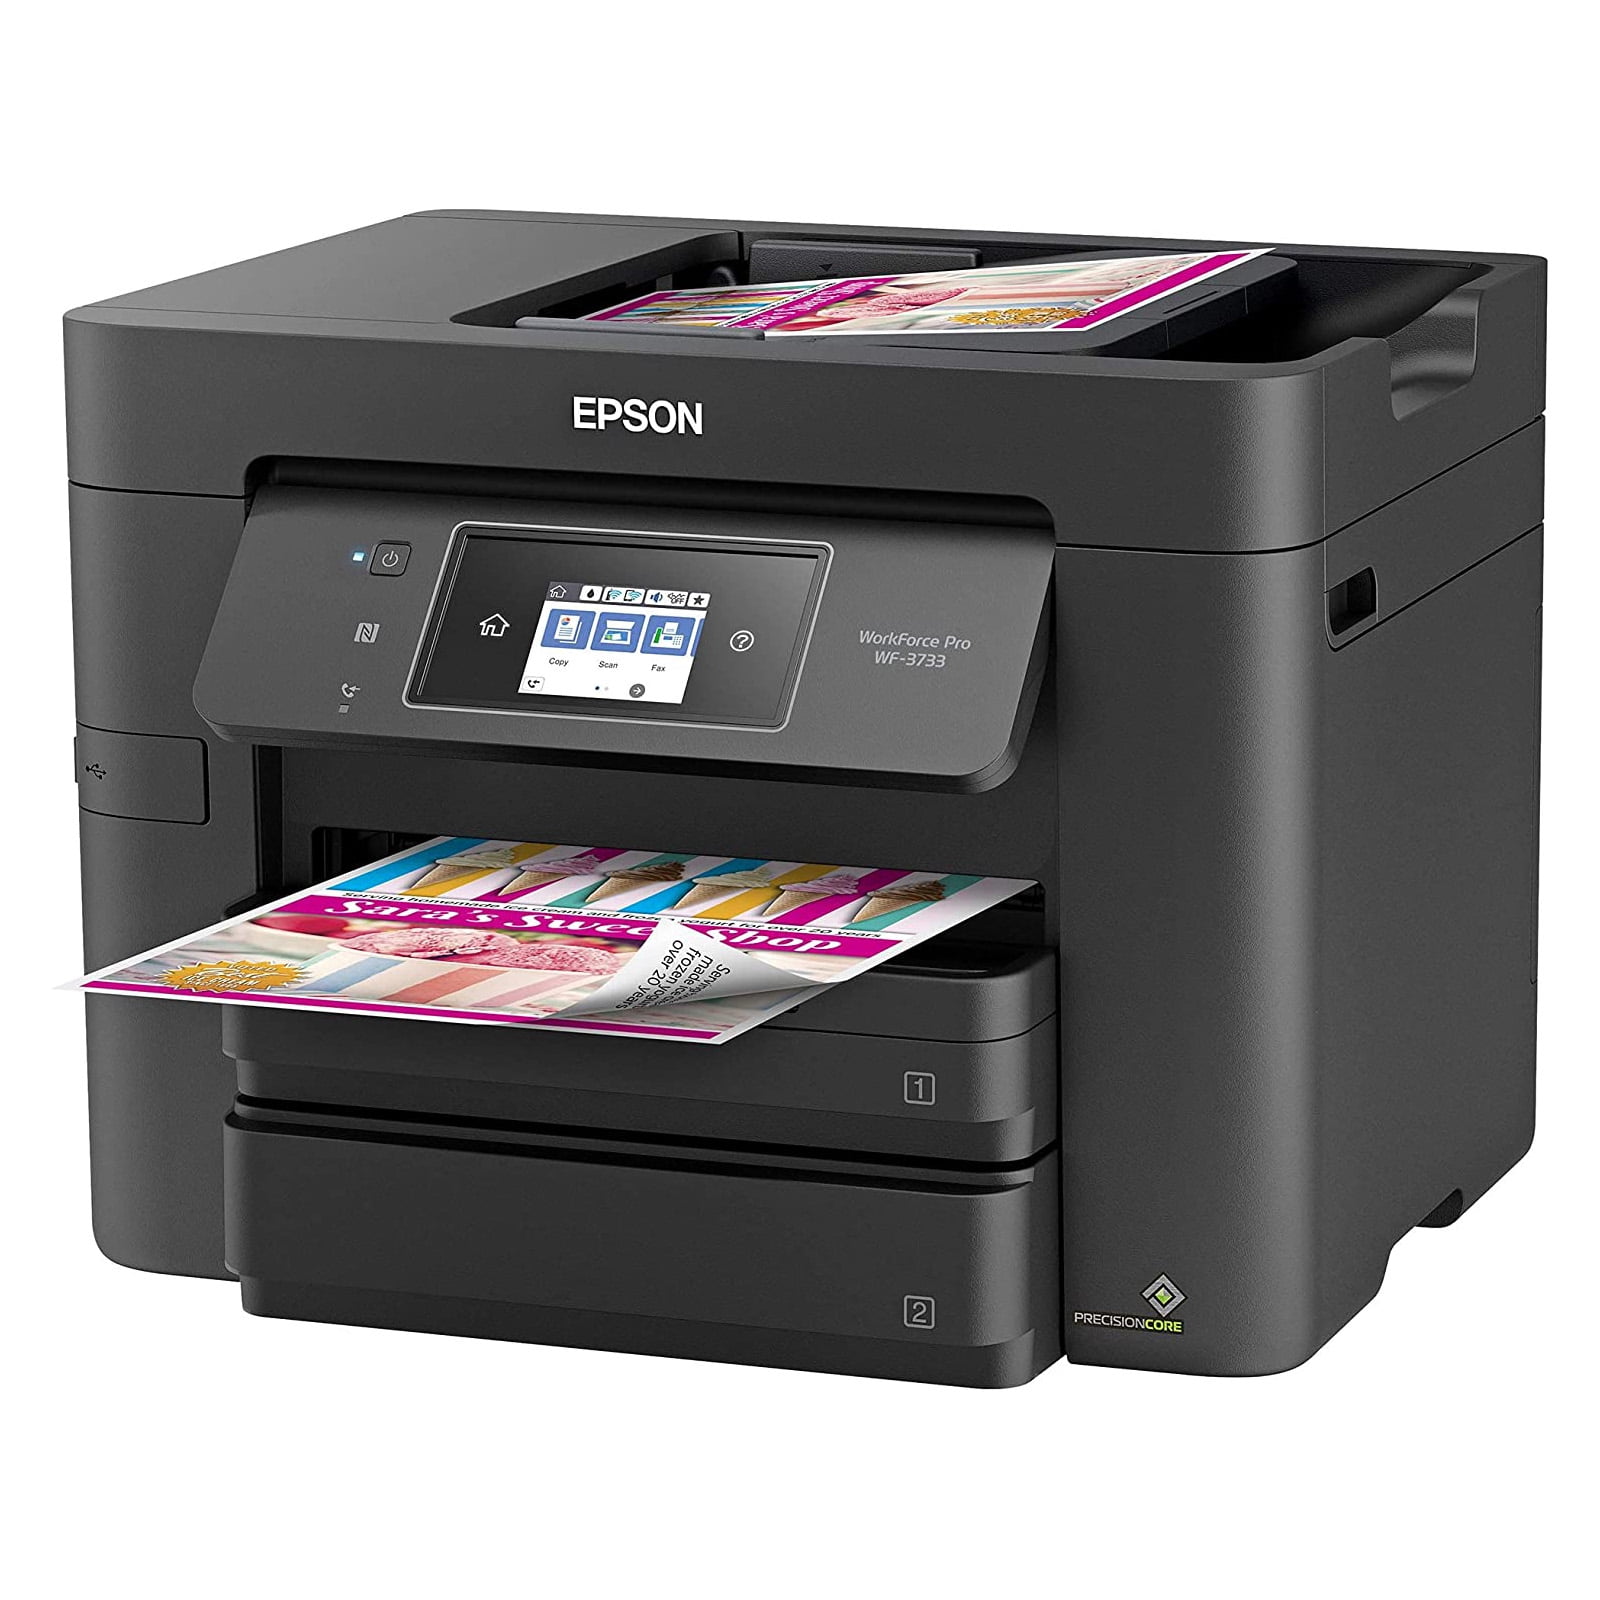 Epson Workforce Pro Wf 3733 Wireless All In One Color Inkjet Printer Home Office Printer 1551